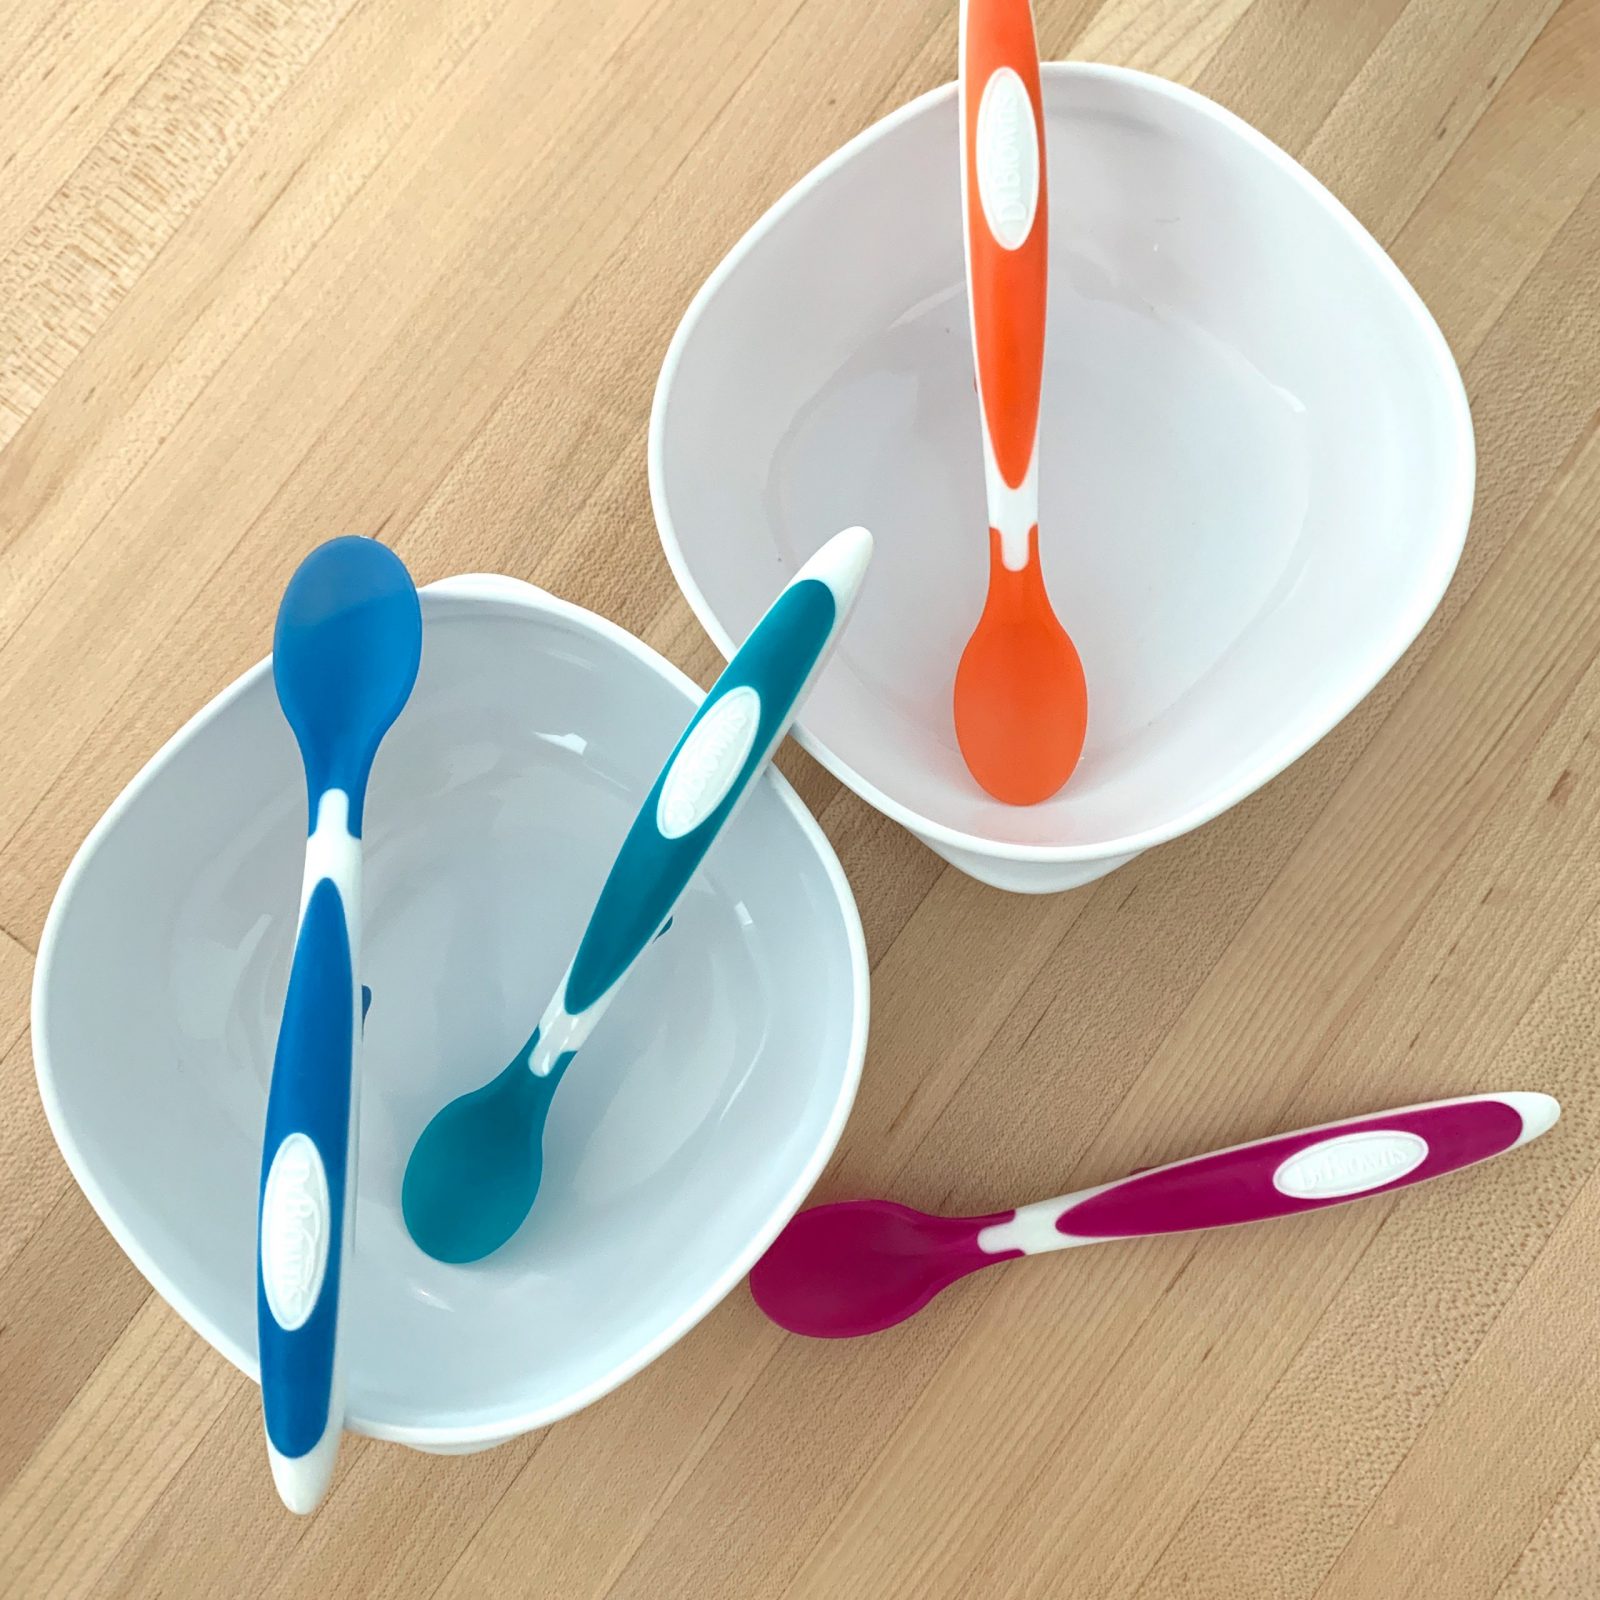 Too Soon to Spoon? How to Know When Your Child is Ready for the Spoon.